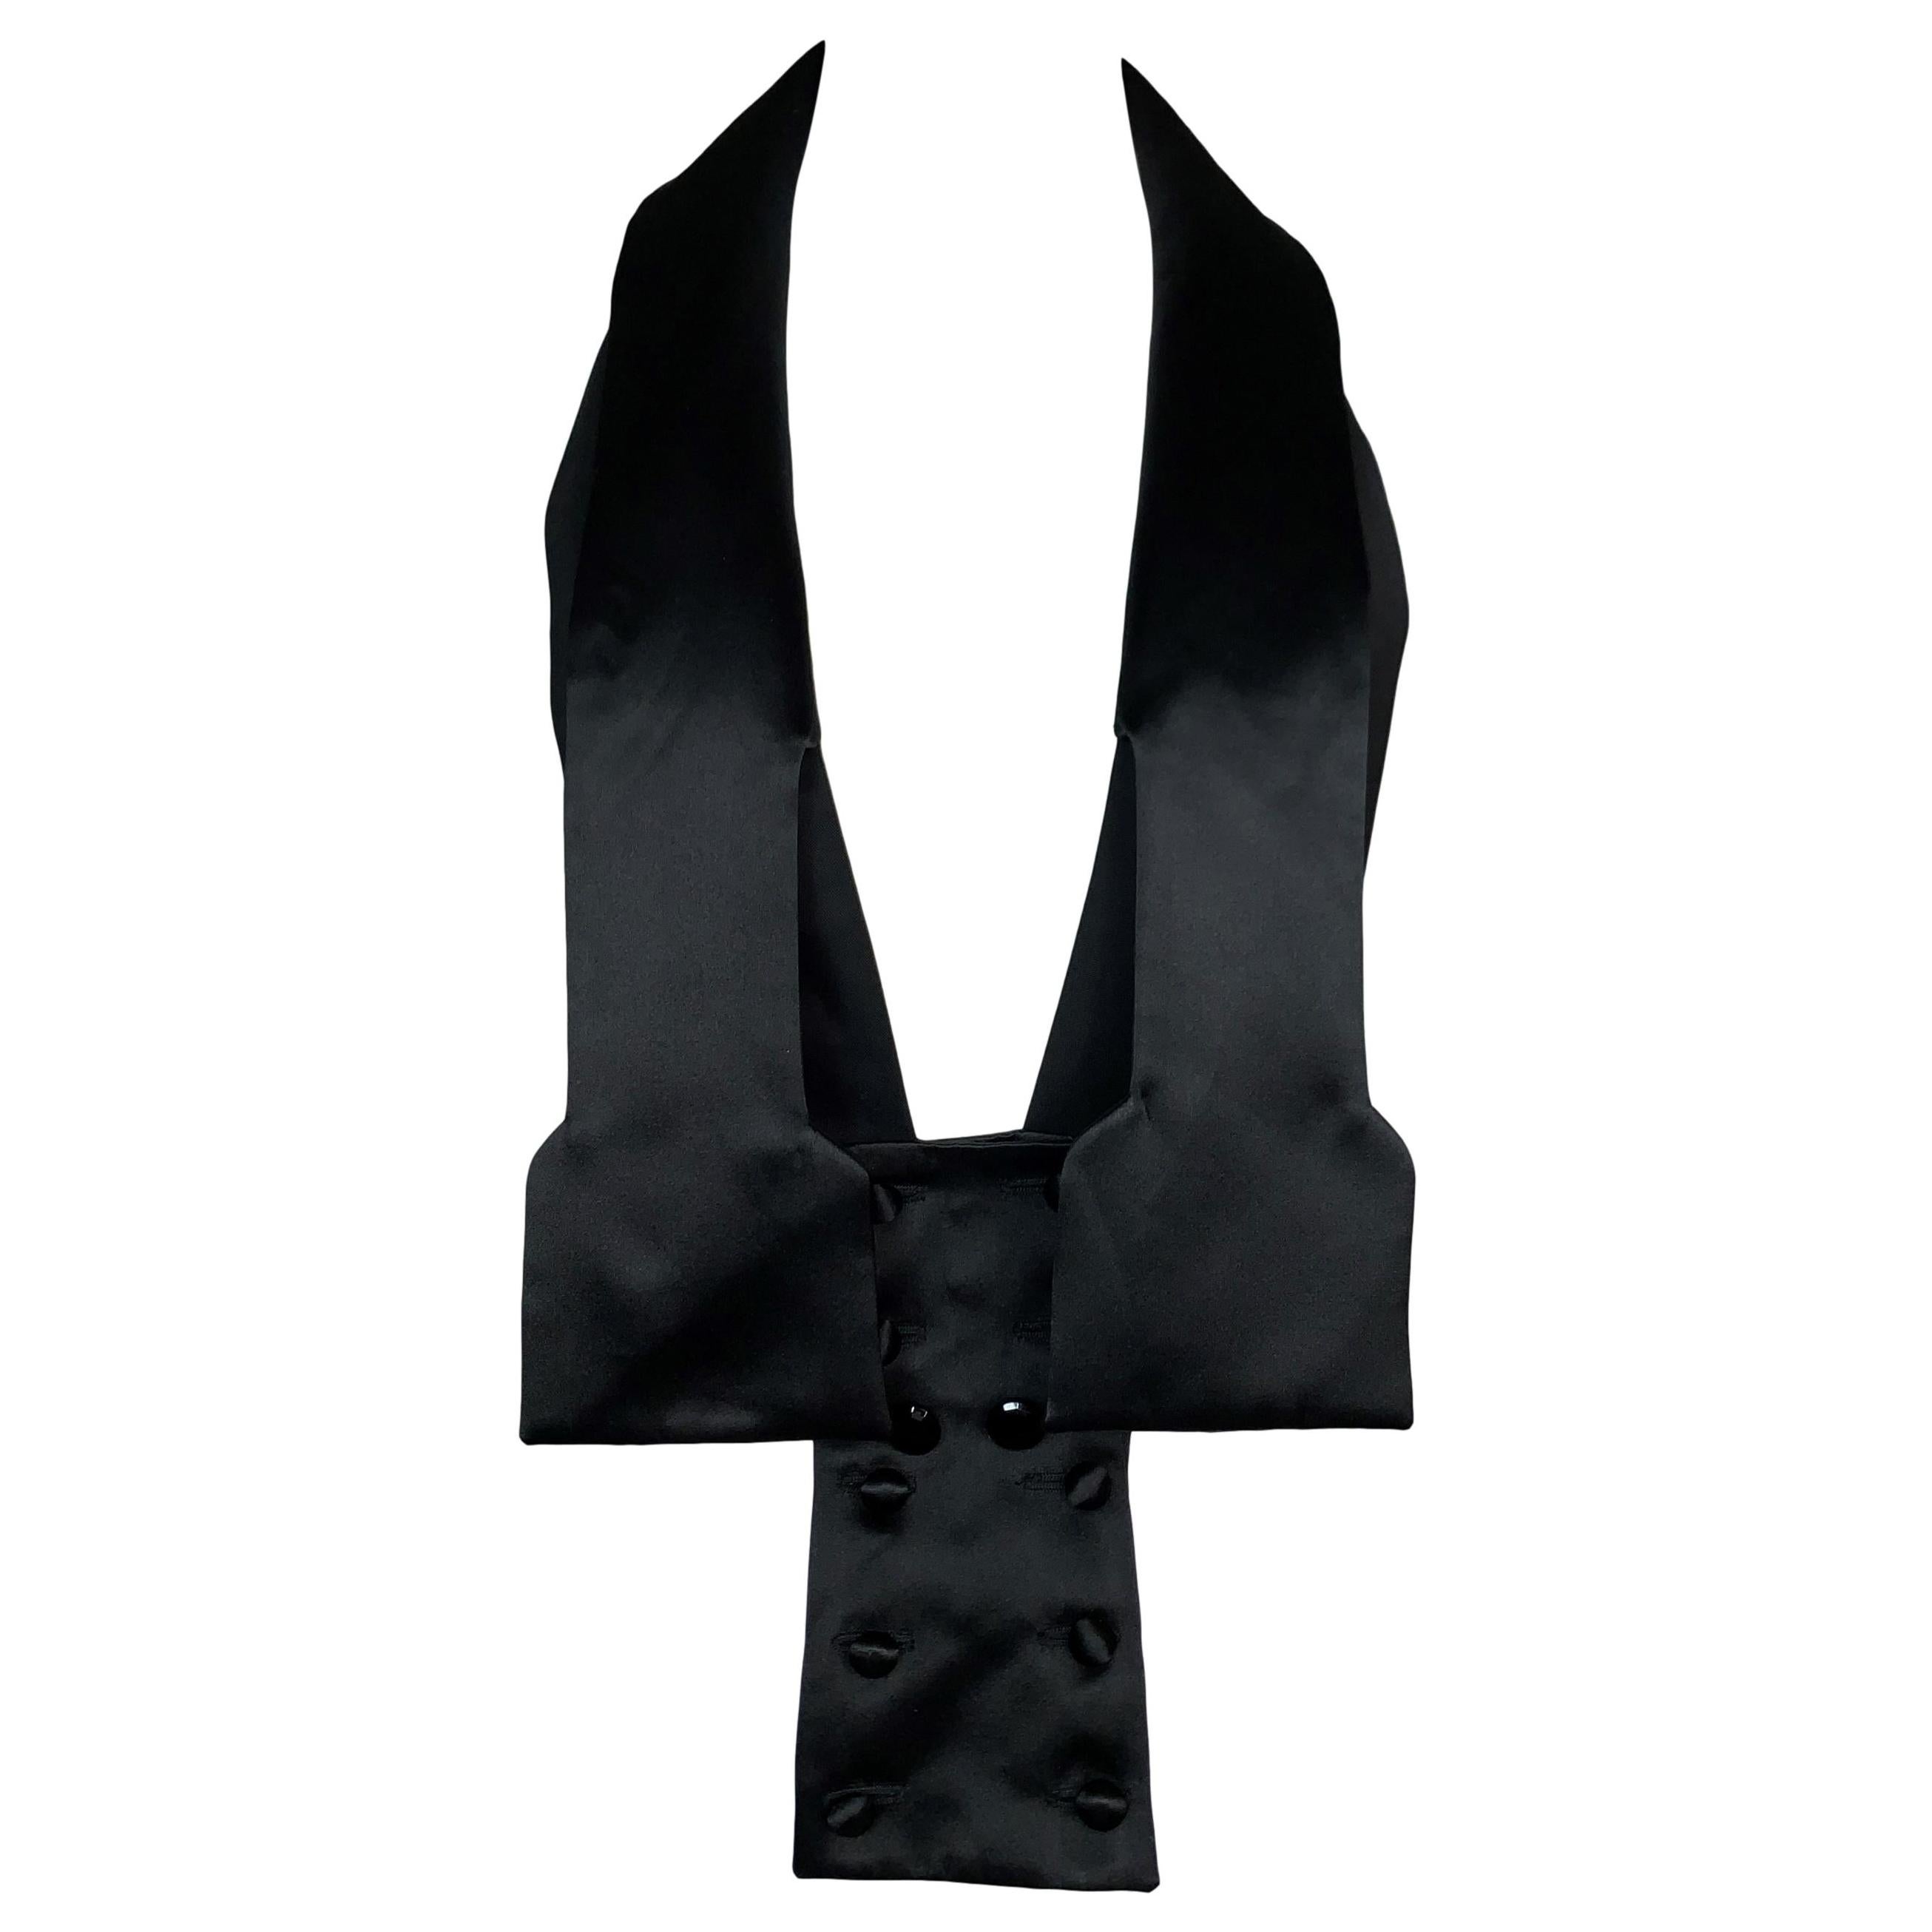 S/S 2004 Yves Saint Laurent Tom Ford Plunging Black Tuxedo Crop Top